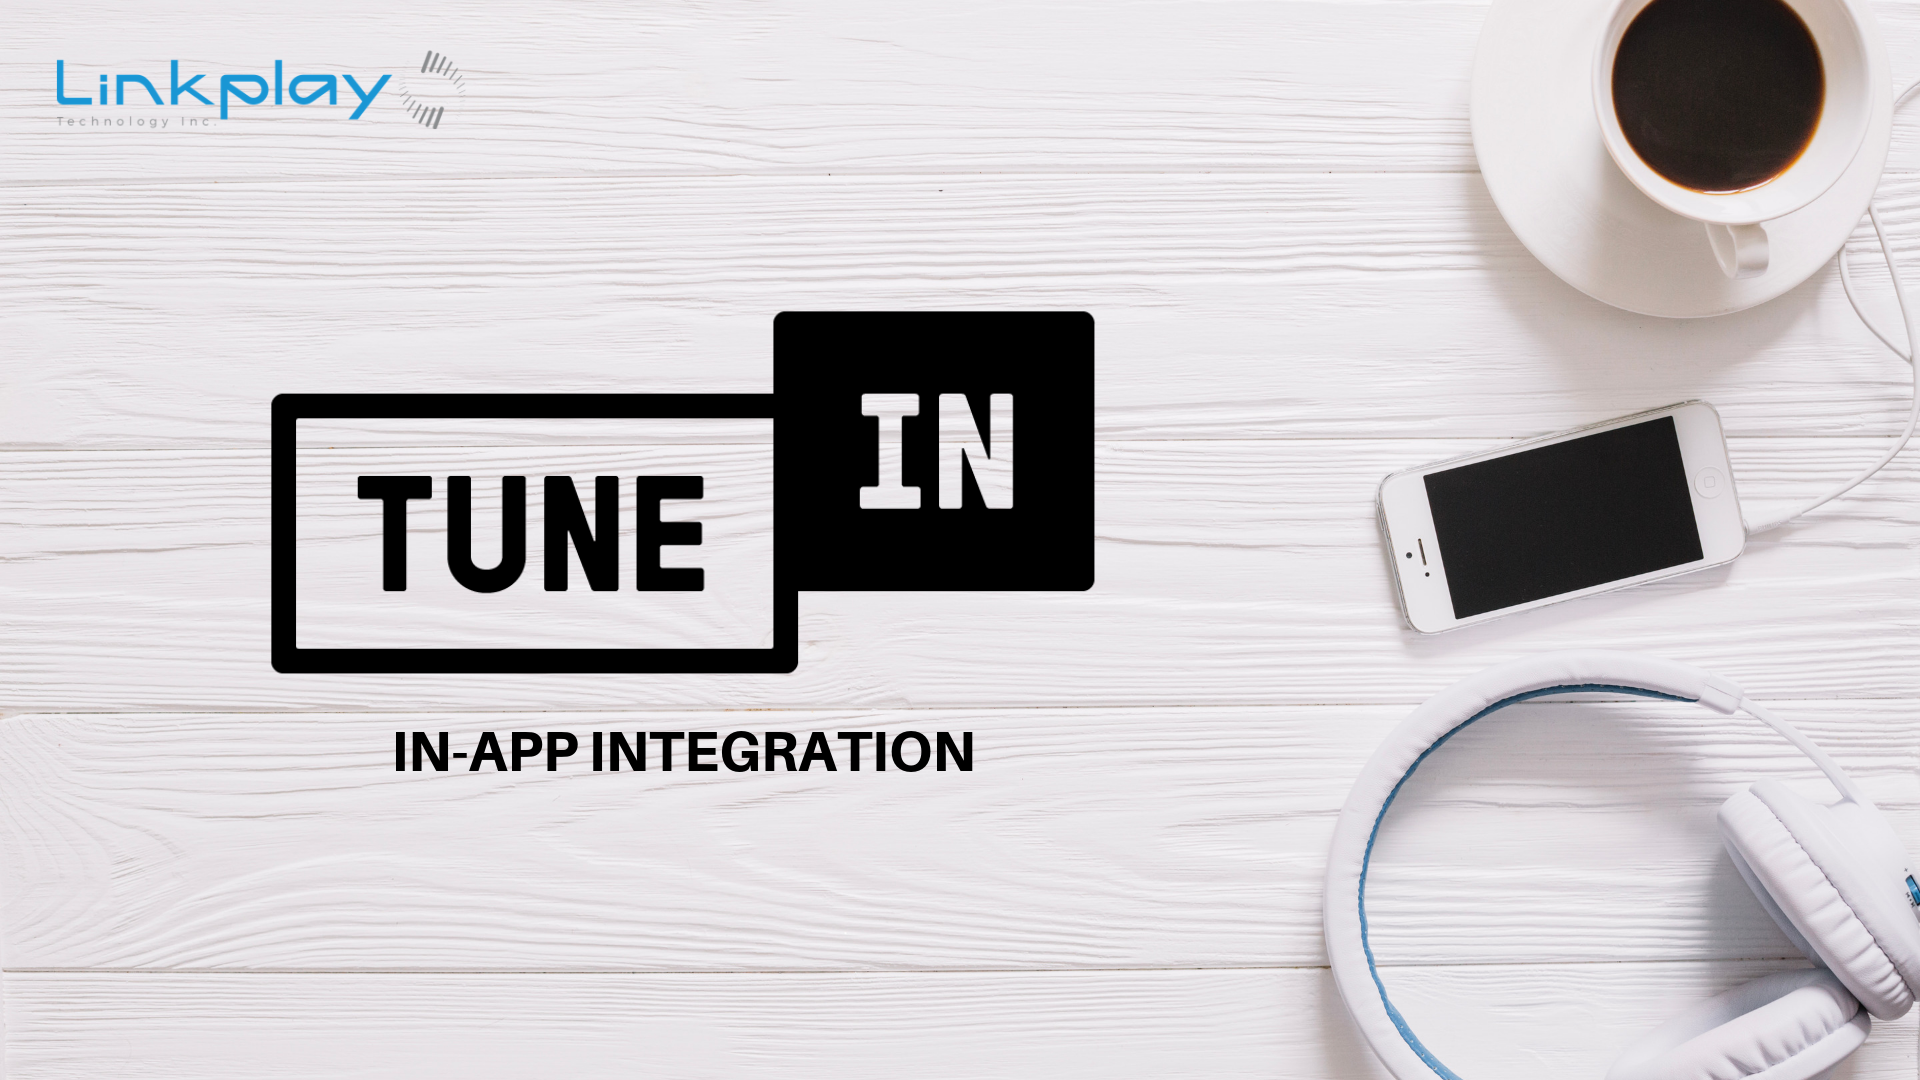 TuneIn is now fully integrated on the Linkplay app — Linkplay Technology